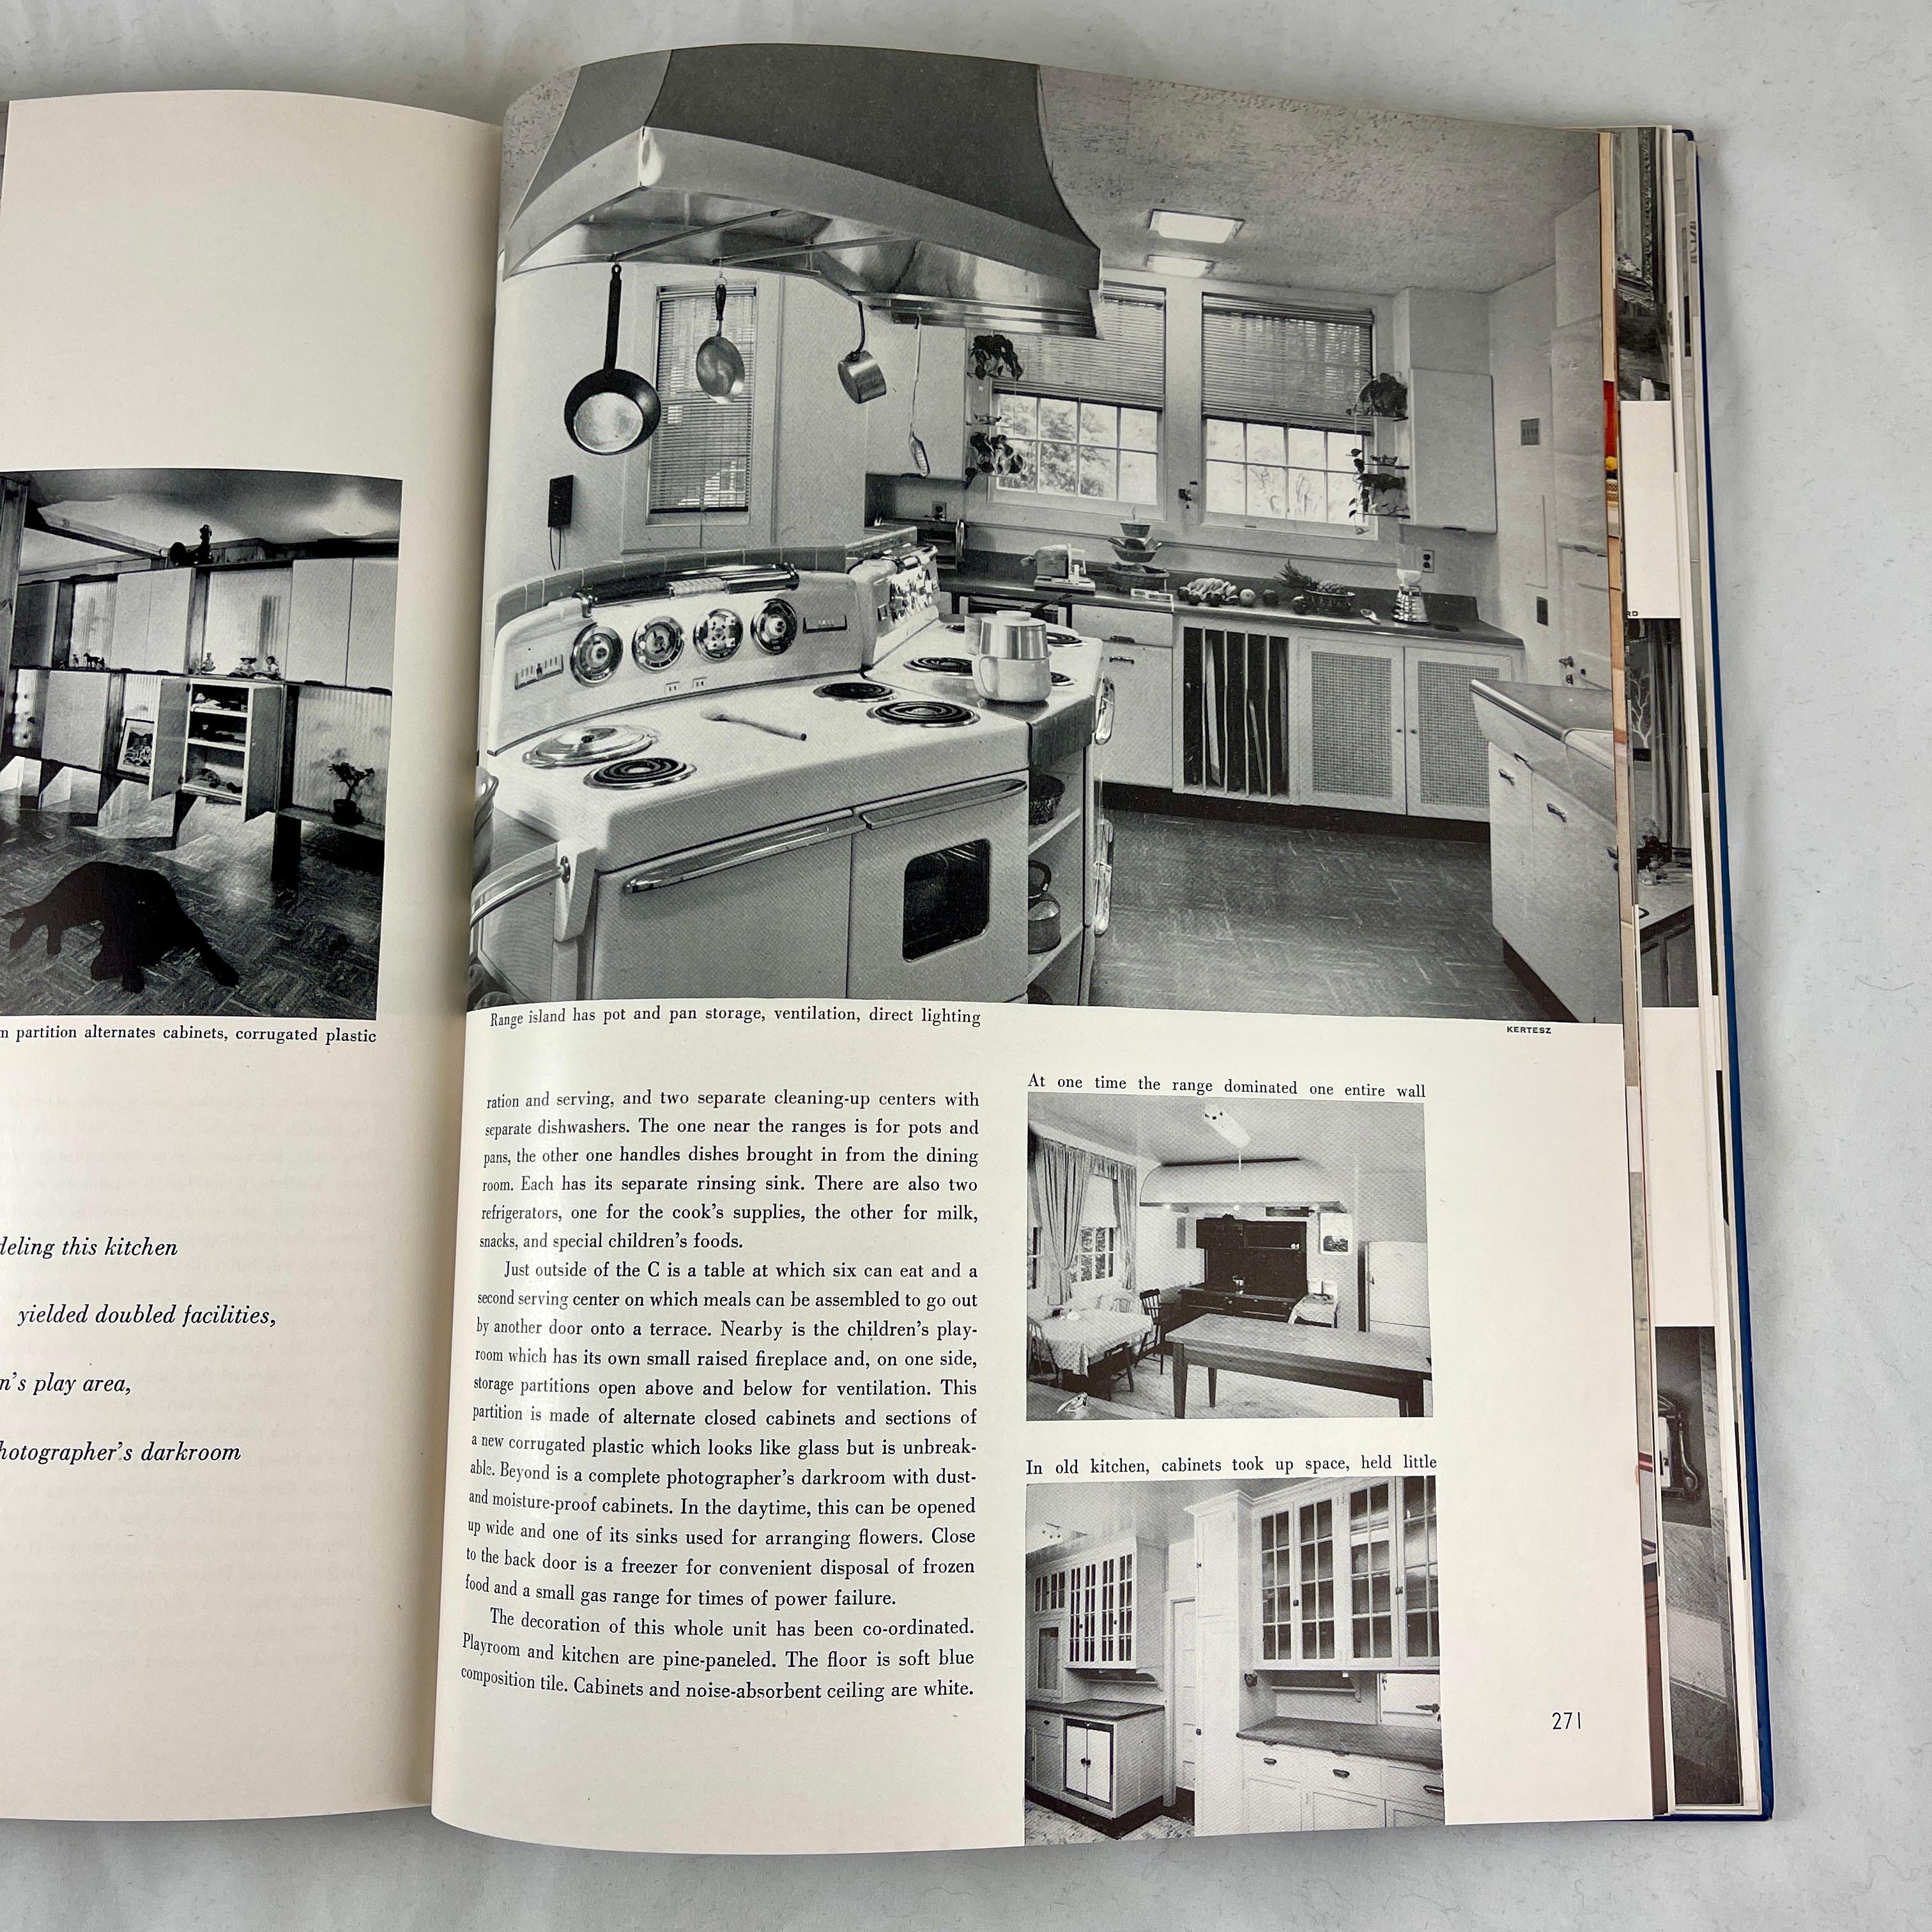 Mid-20th Century House & Garden’s Complete Guide to Interior Decoration, Hardcover Book, 1953 For Sale